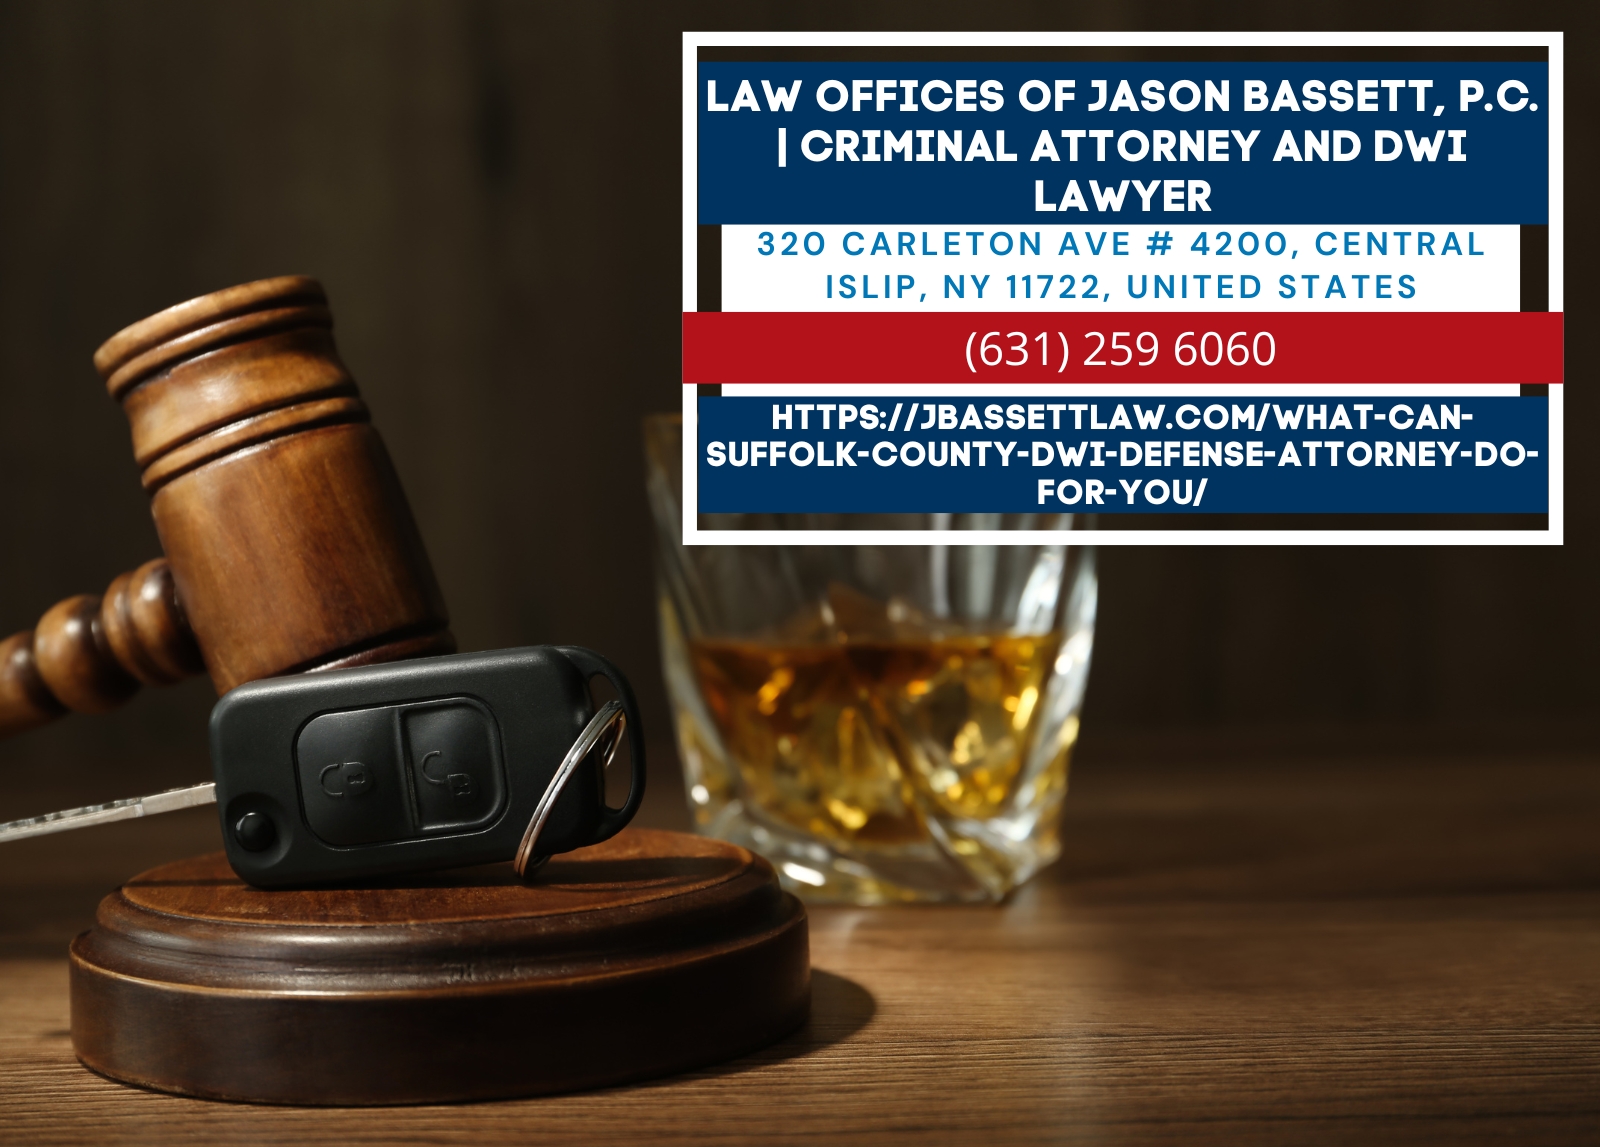 Suffolk County DWI Defense Attorney Jason Bassett Releases Guidance Article on DWI Charges